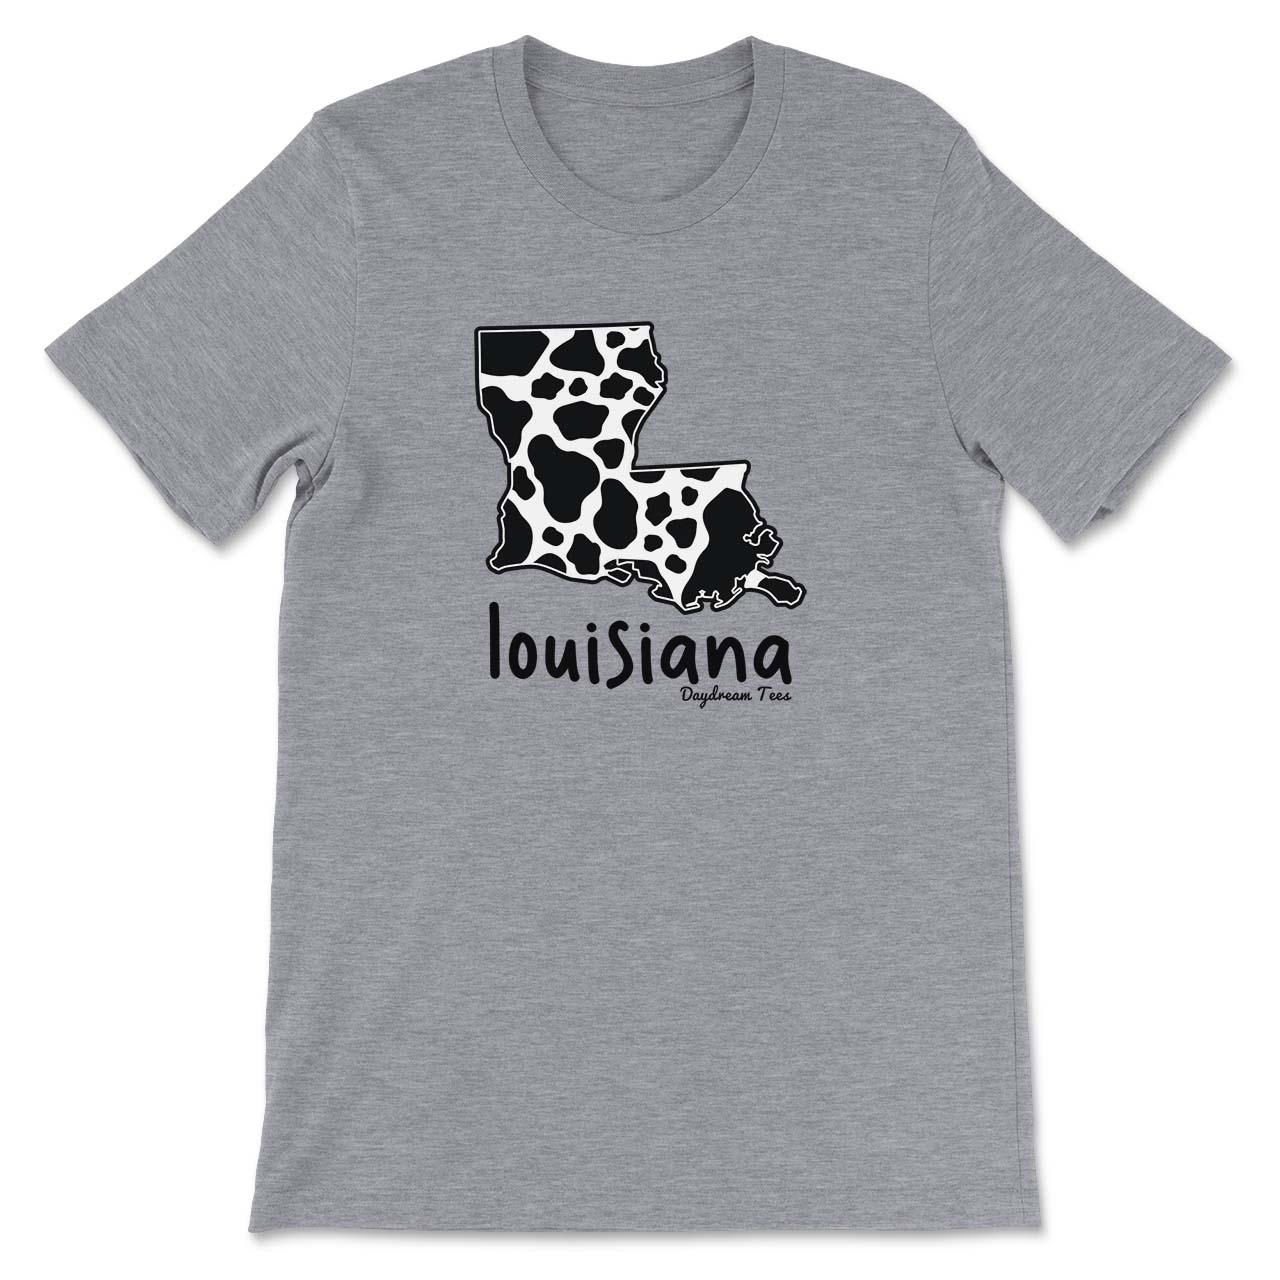 Daydream Tees Cow State LA